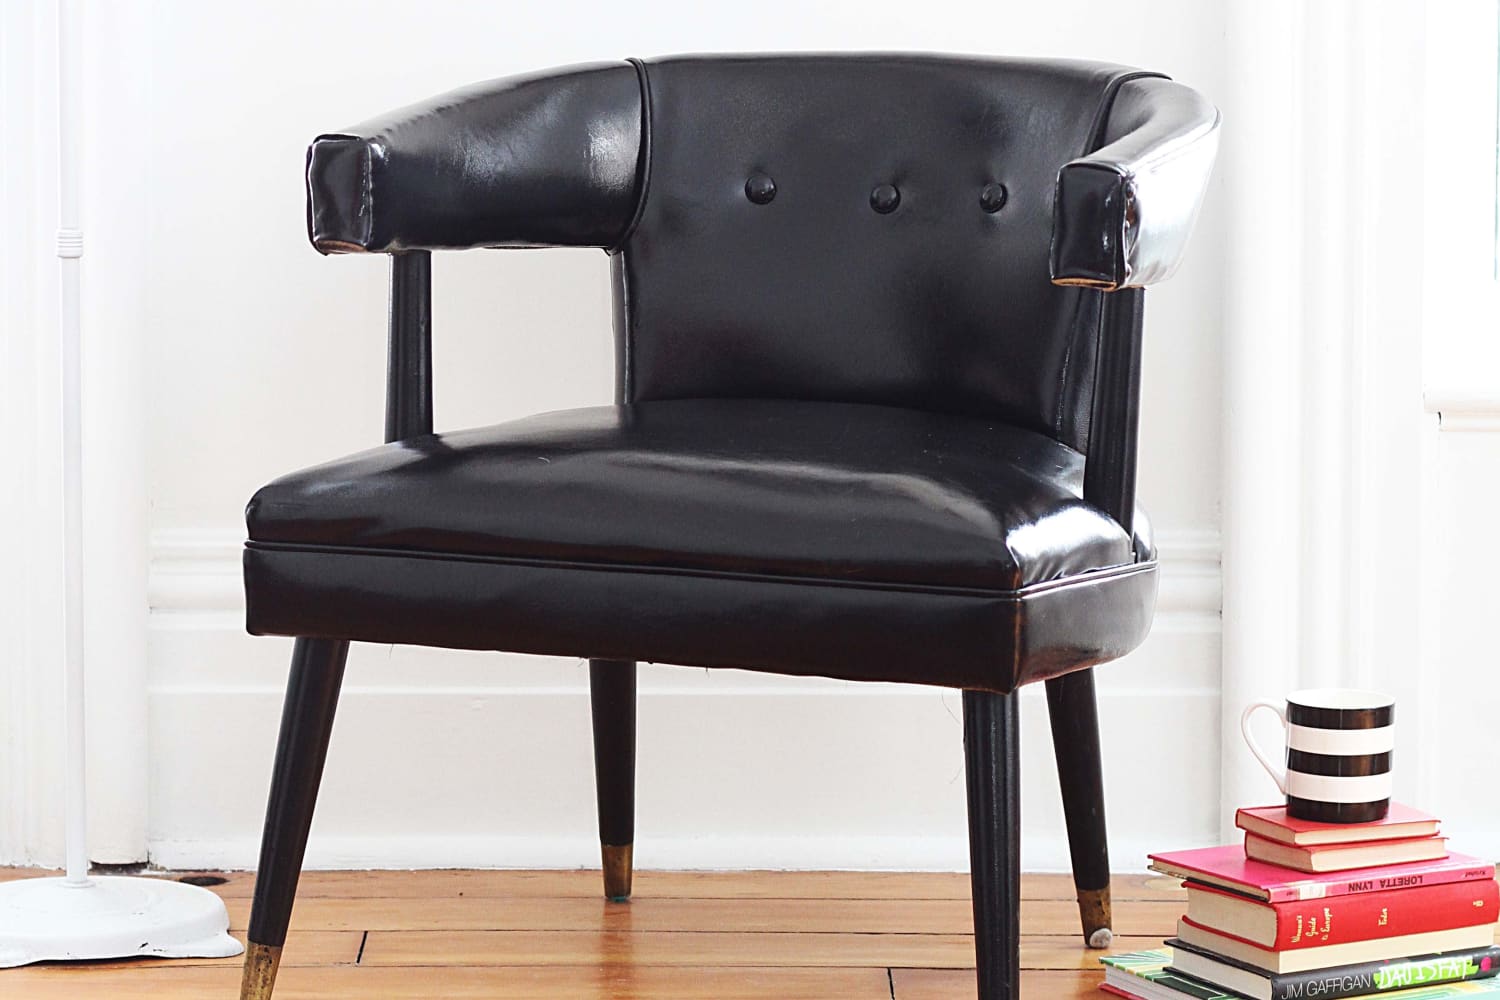 Renew Pleather or Paint Plastic with the Best Spray Paints for Vinyl –